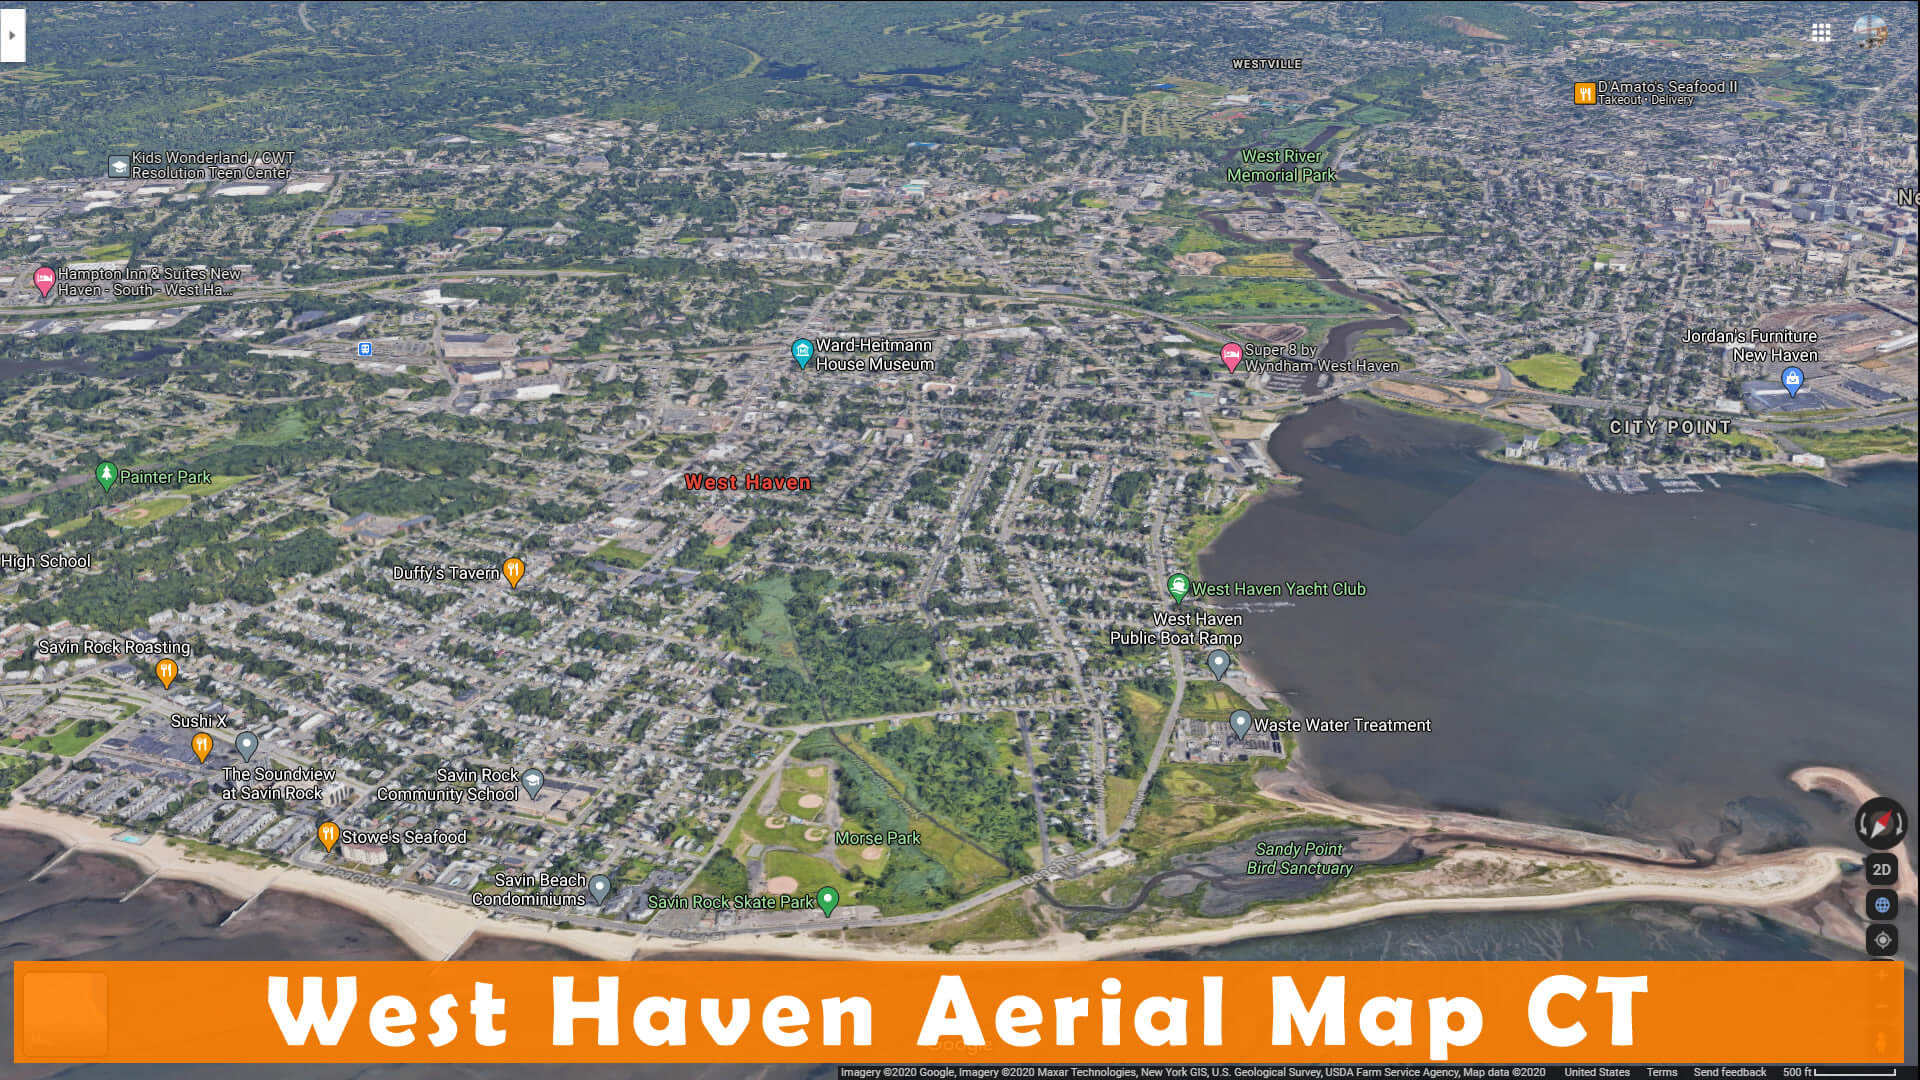 West Haven Aerial Map CT